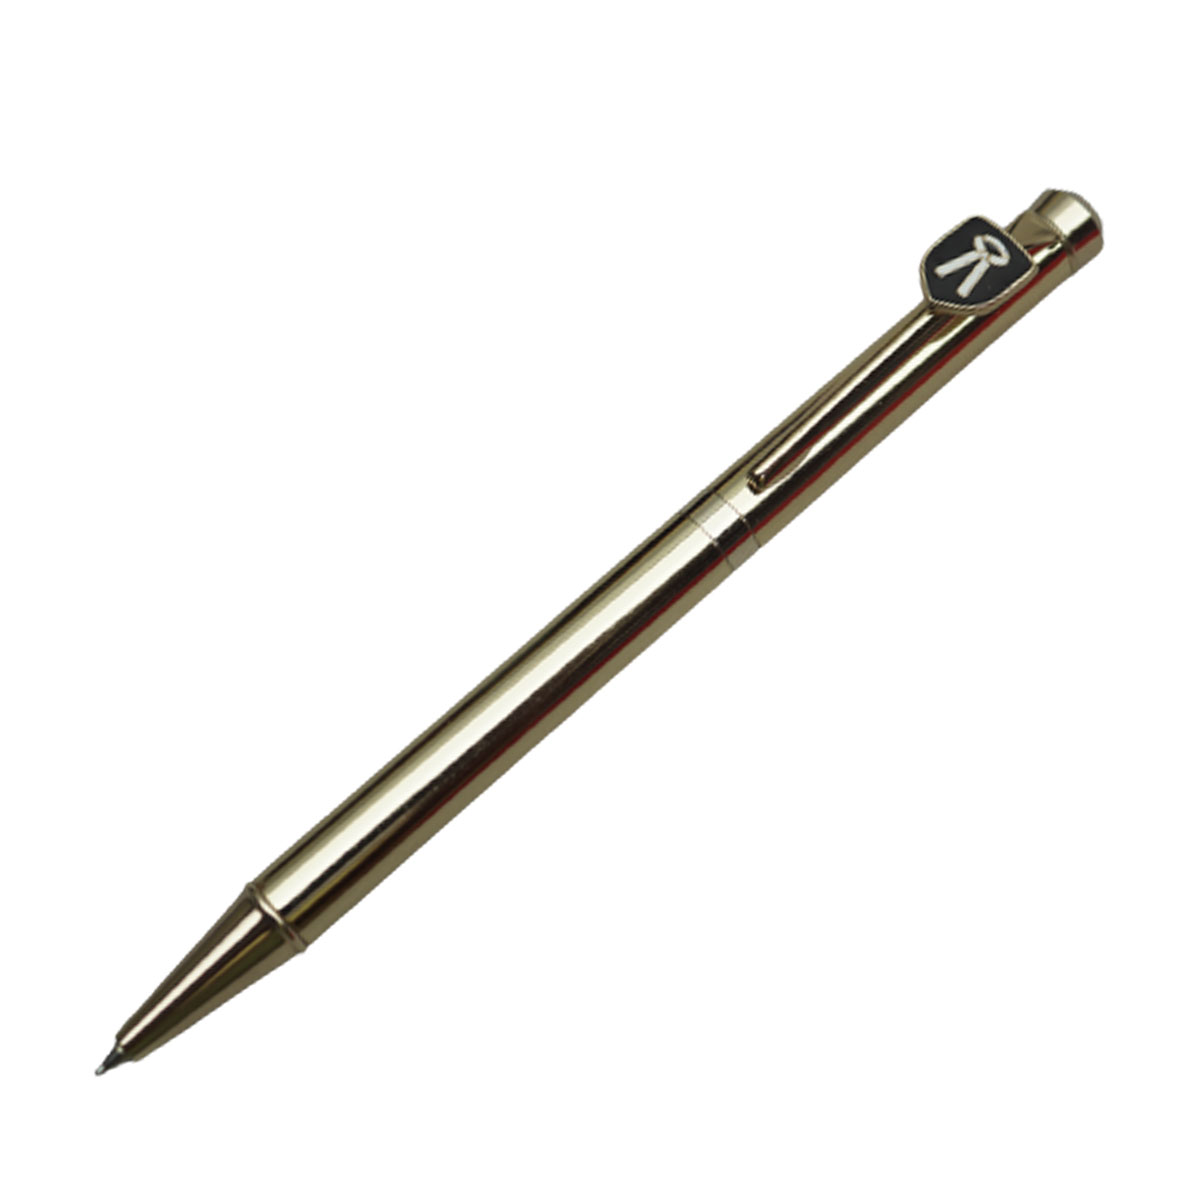 penhouse.in Advocate Symbol Slim Full Gold Color Body With Stone on Top Fine Tip Twist Ball Pen SKU 20094